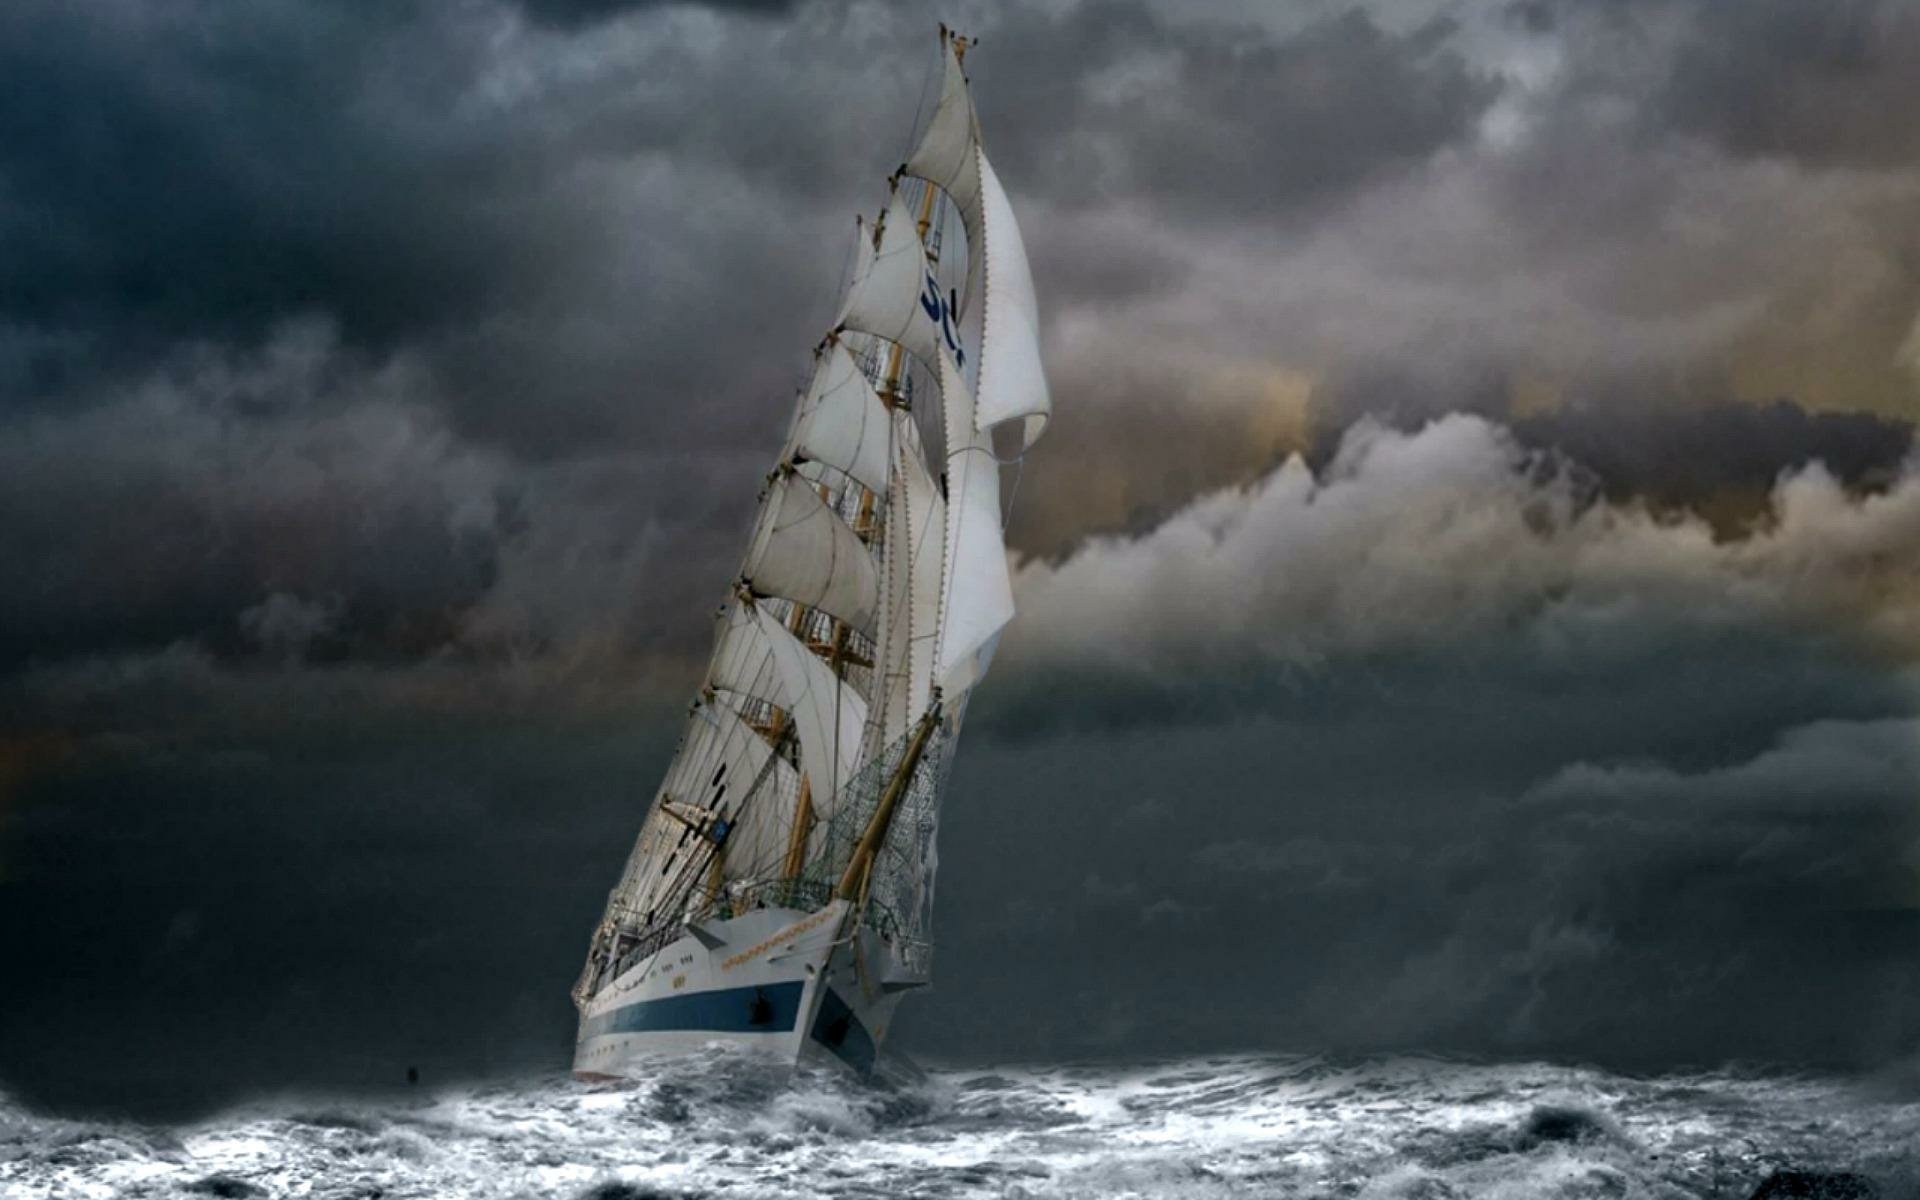 sailboat in storm pictures